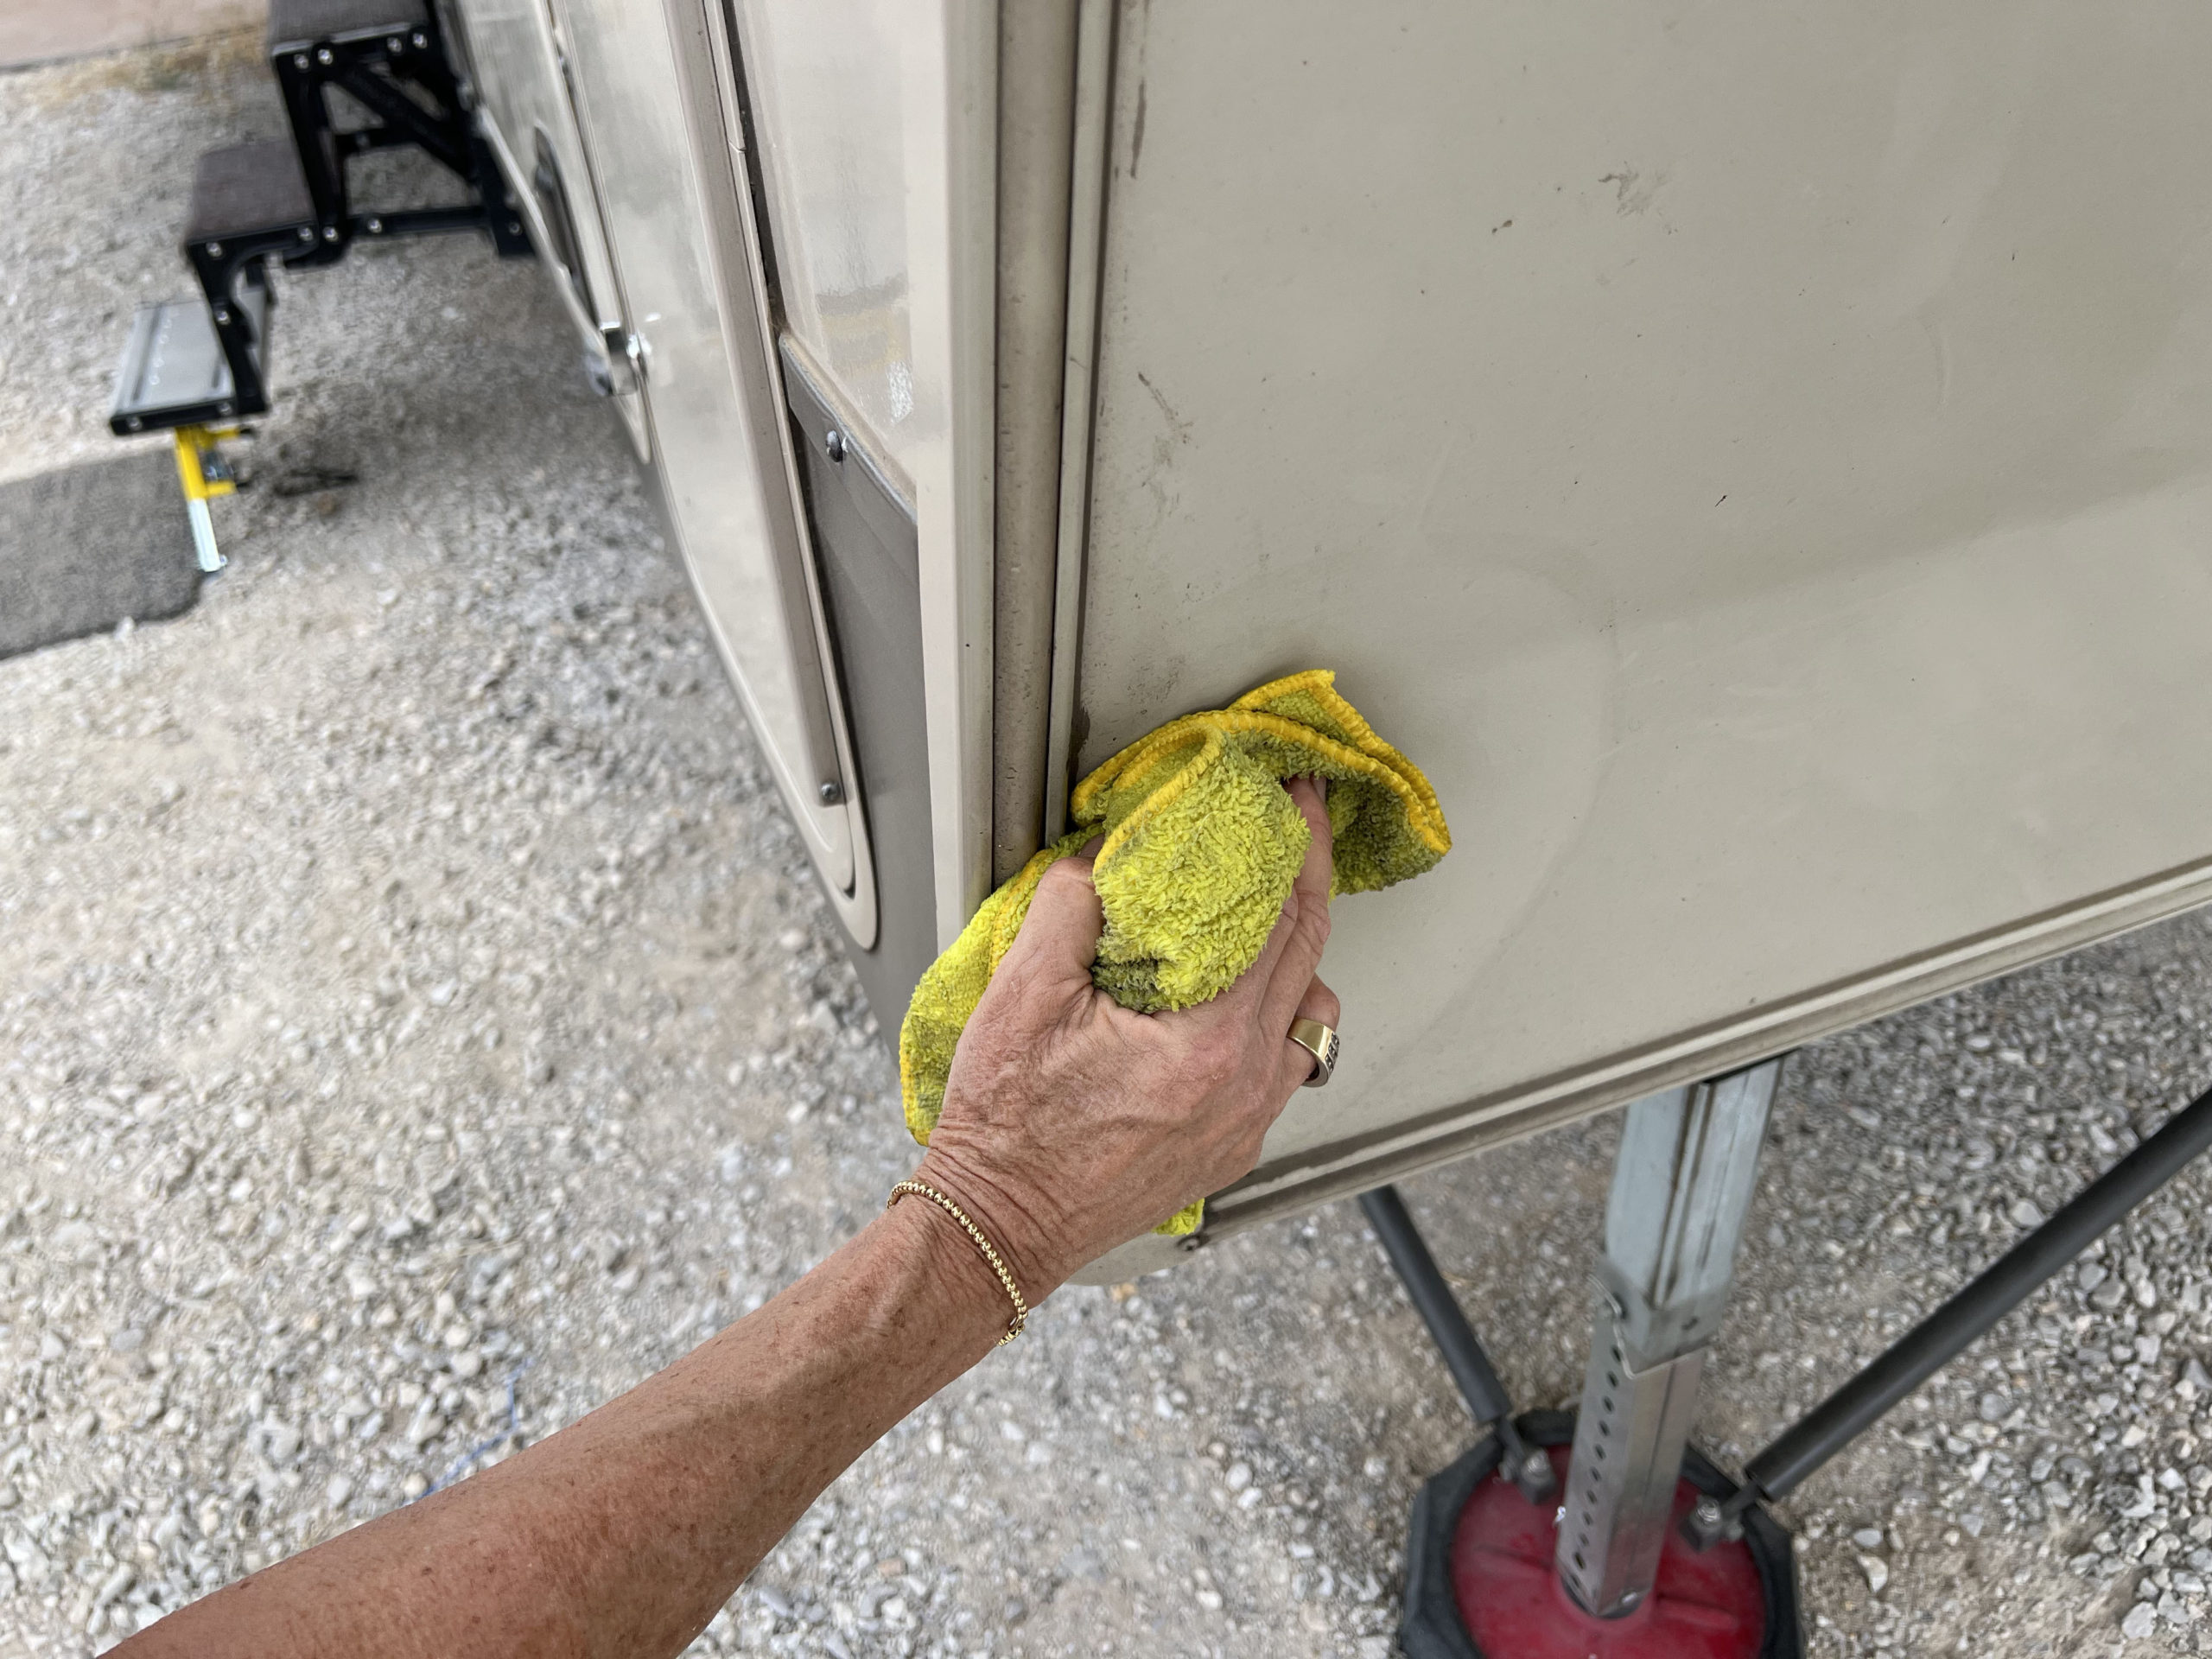 technician uses a microfiber cloth to wipe on/wipe off the Optimum No Rinse Wash & Shine cleaner